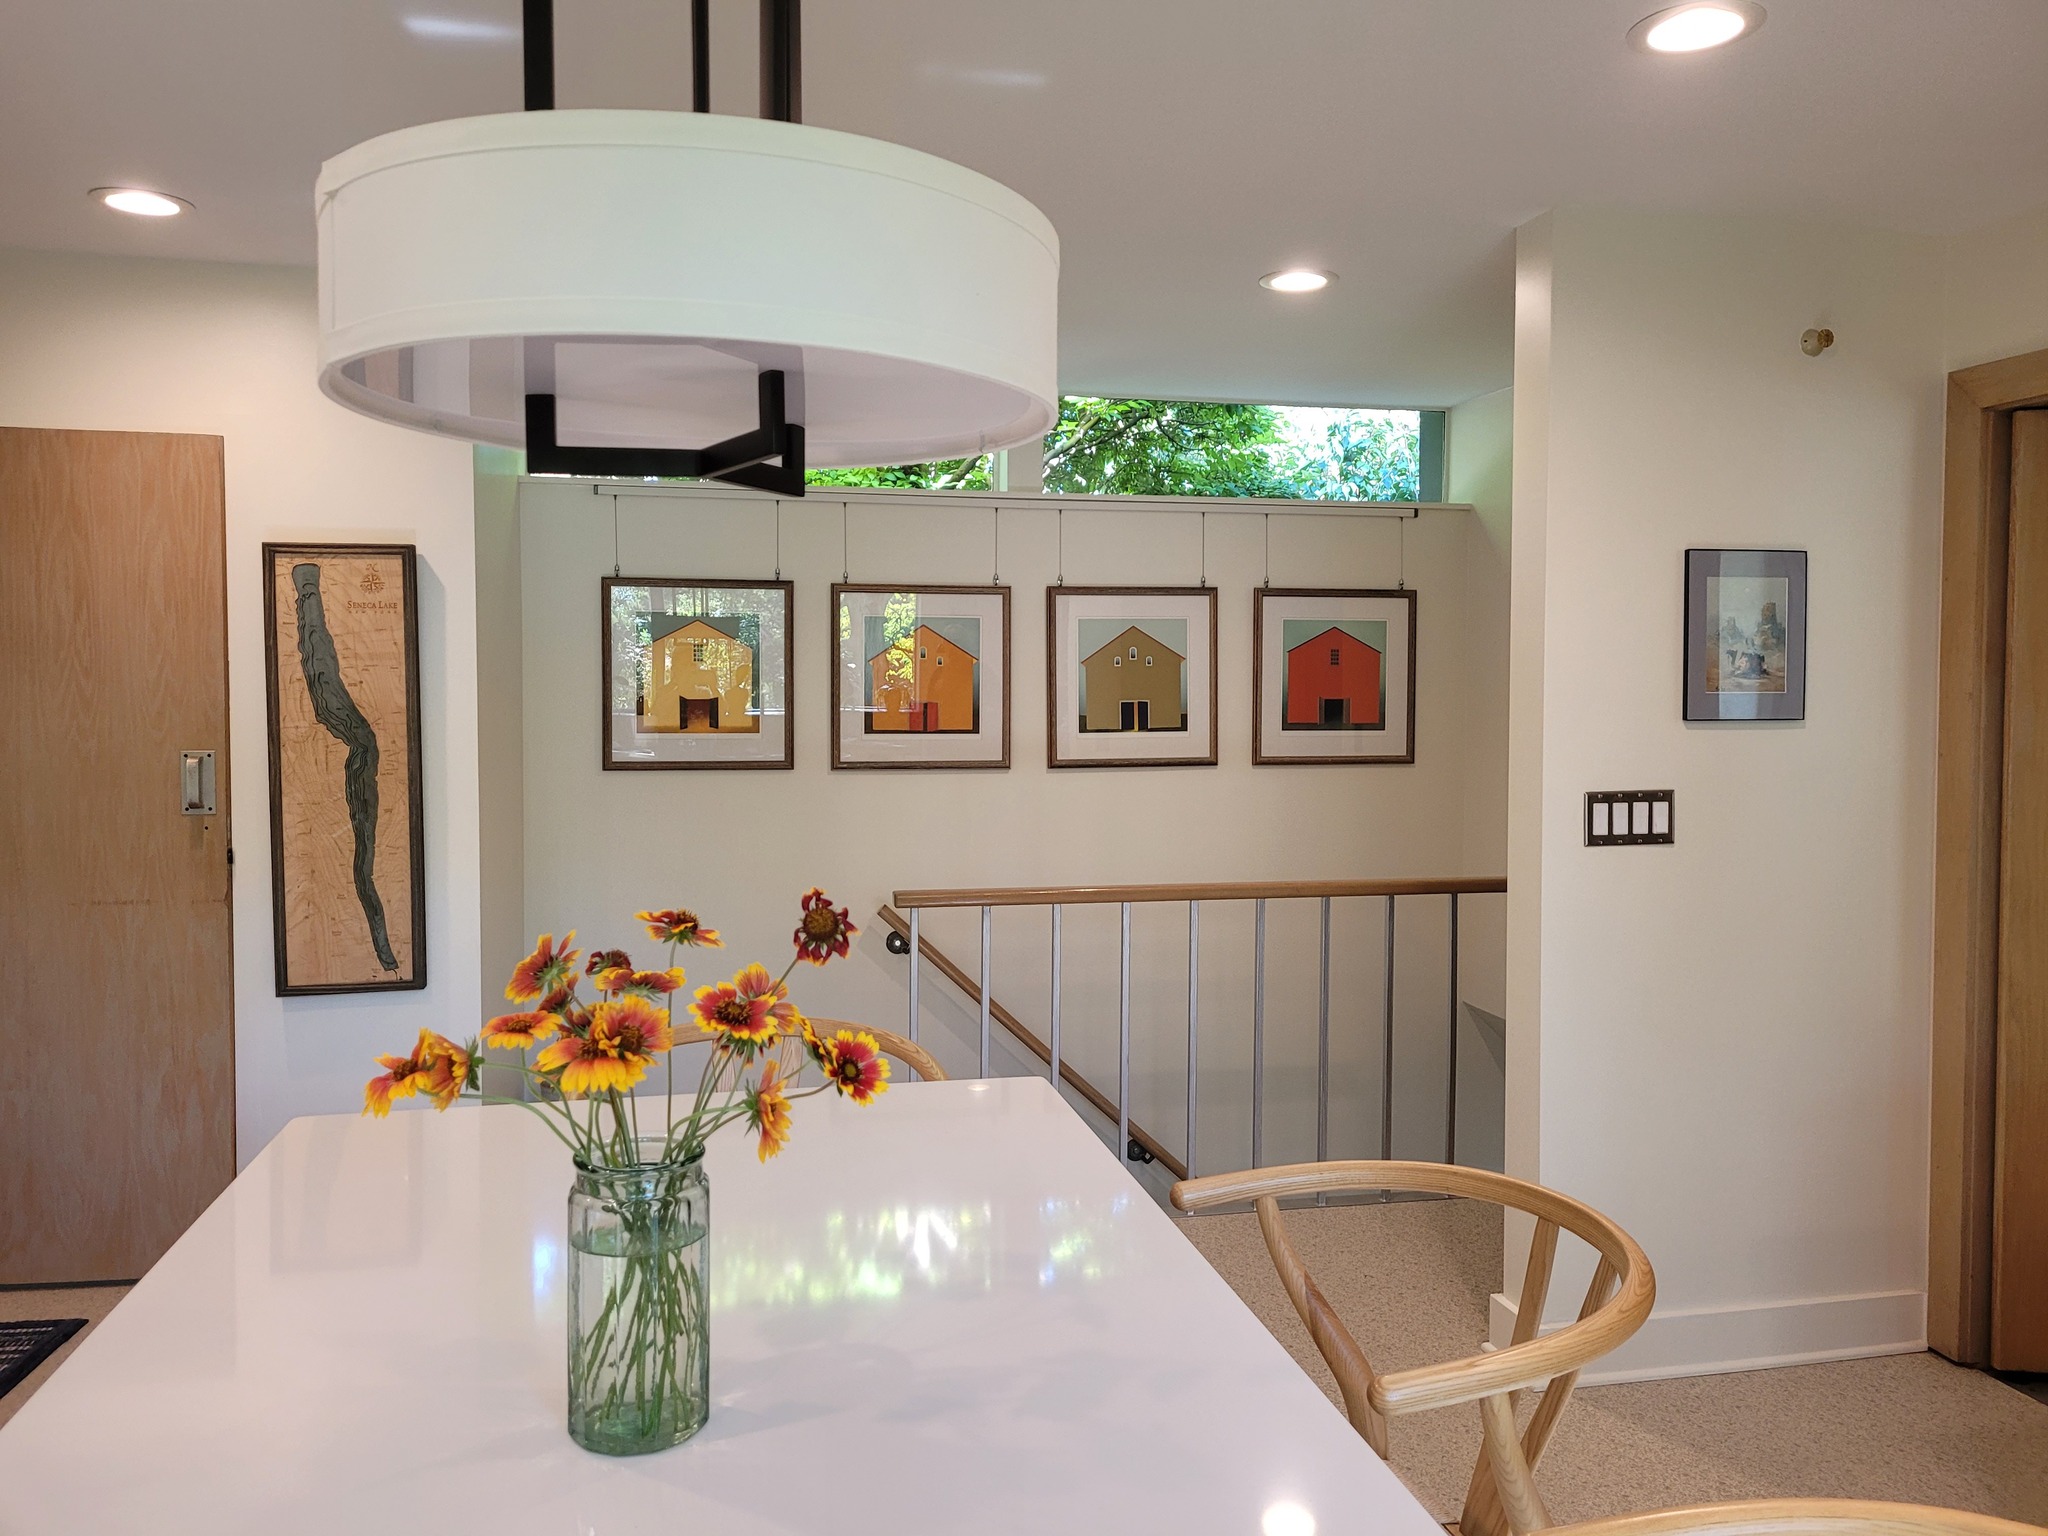 Things You Need to Know About Hanging Art